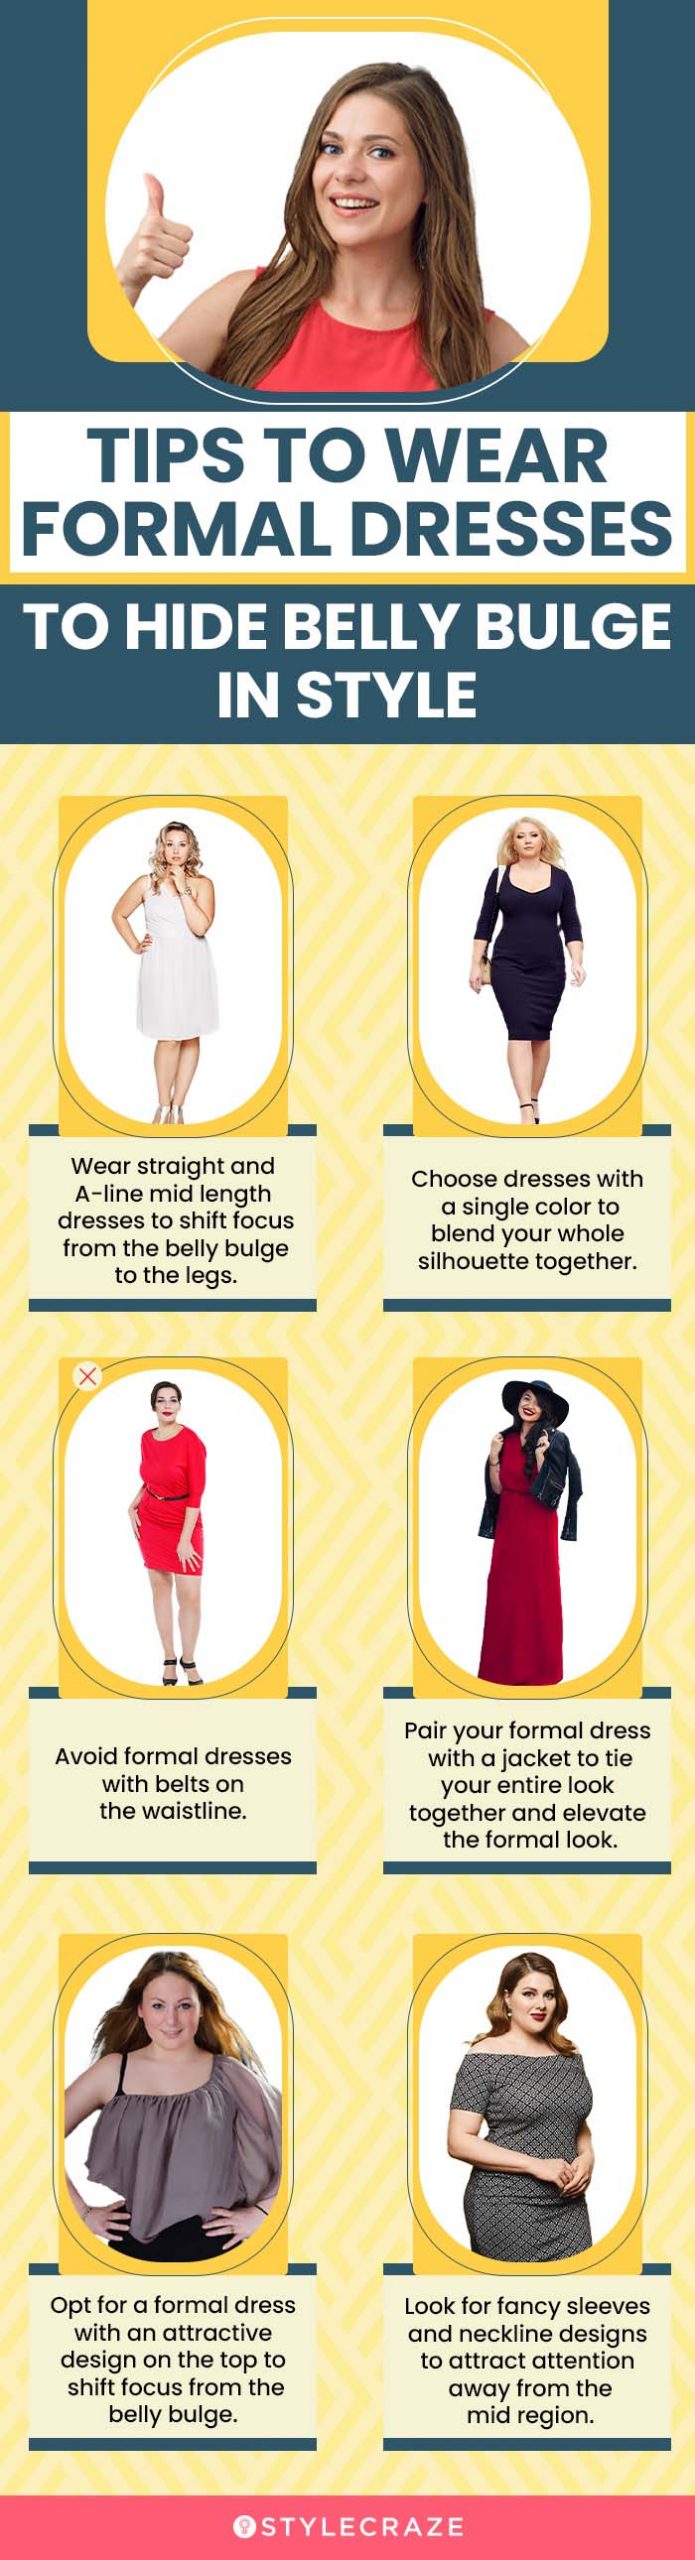 Tips To Wear Formal Dresses That Hide Belly Bulge In Style (infographic)